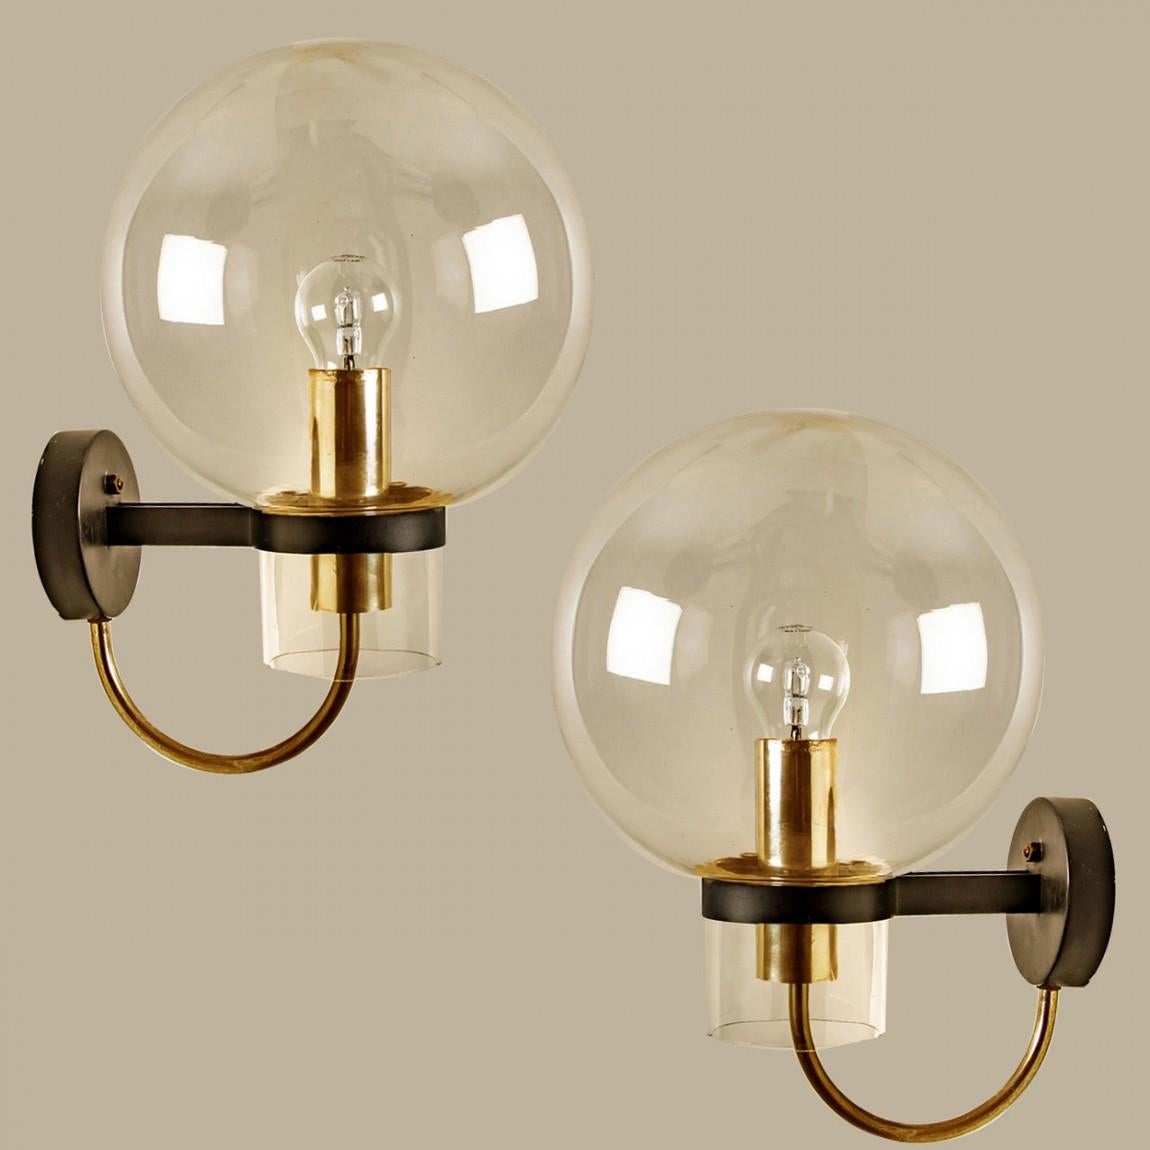 Large quantity of beautiful hand blown clear glass wall lights with brass details. Designed and manufactured by Glashütte Limburg, Germany around 1975.

Beautiful craftsmanship. These midcentury vintage lights feature handmade, elaborate clear